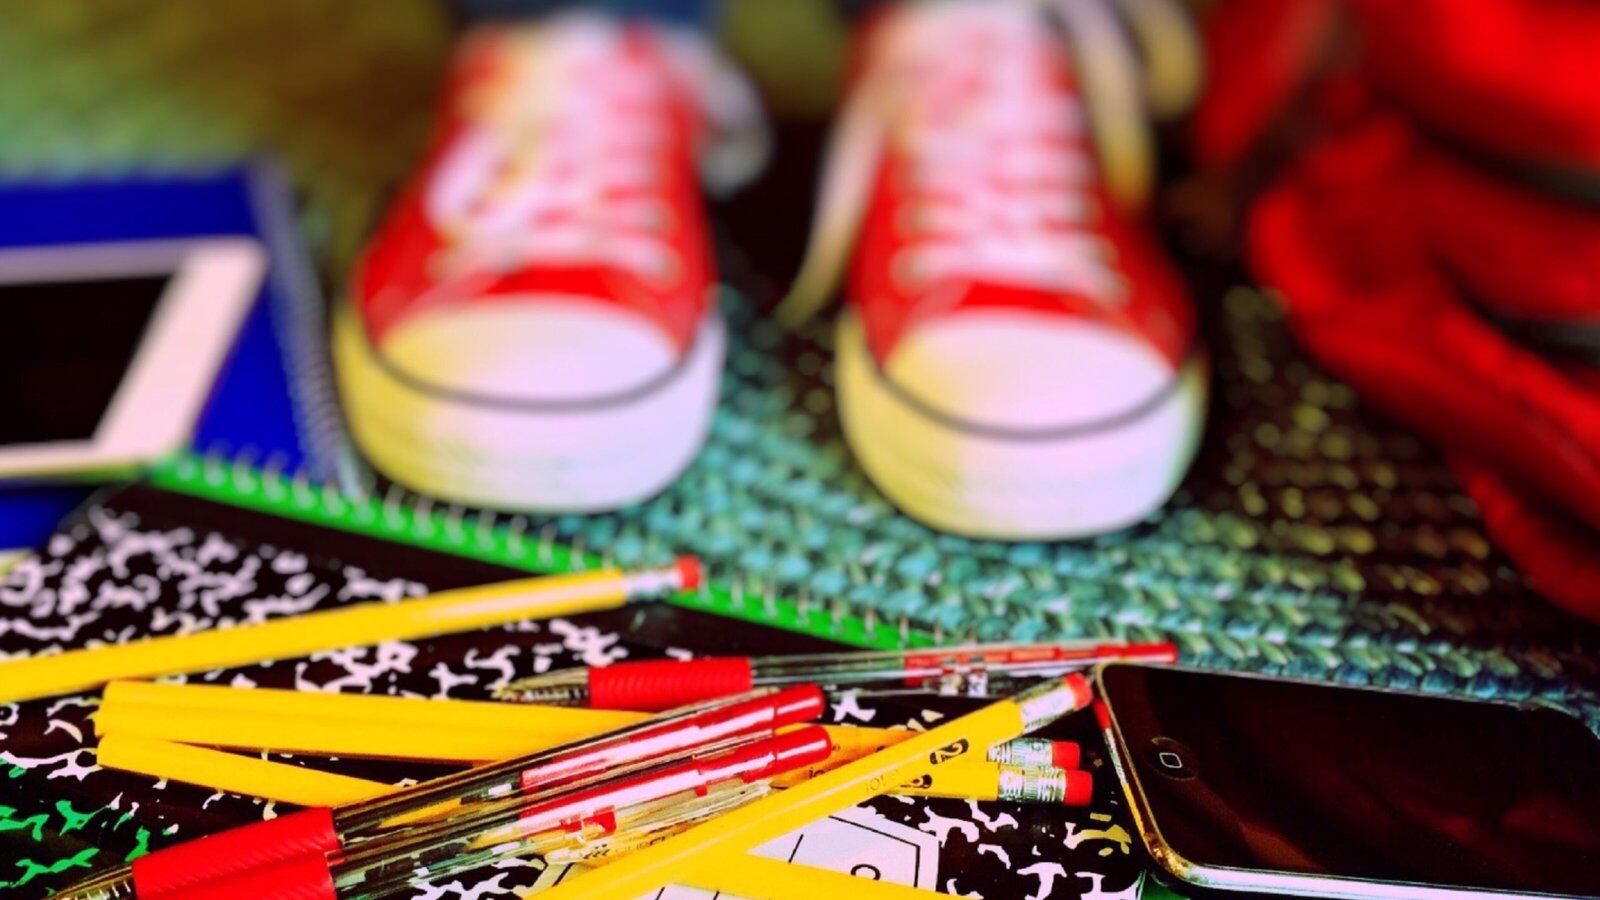 Shoes and school supplies